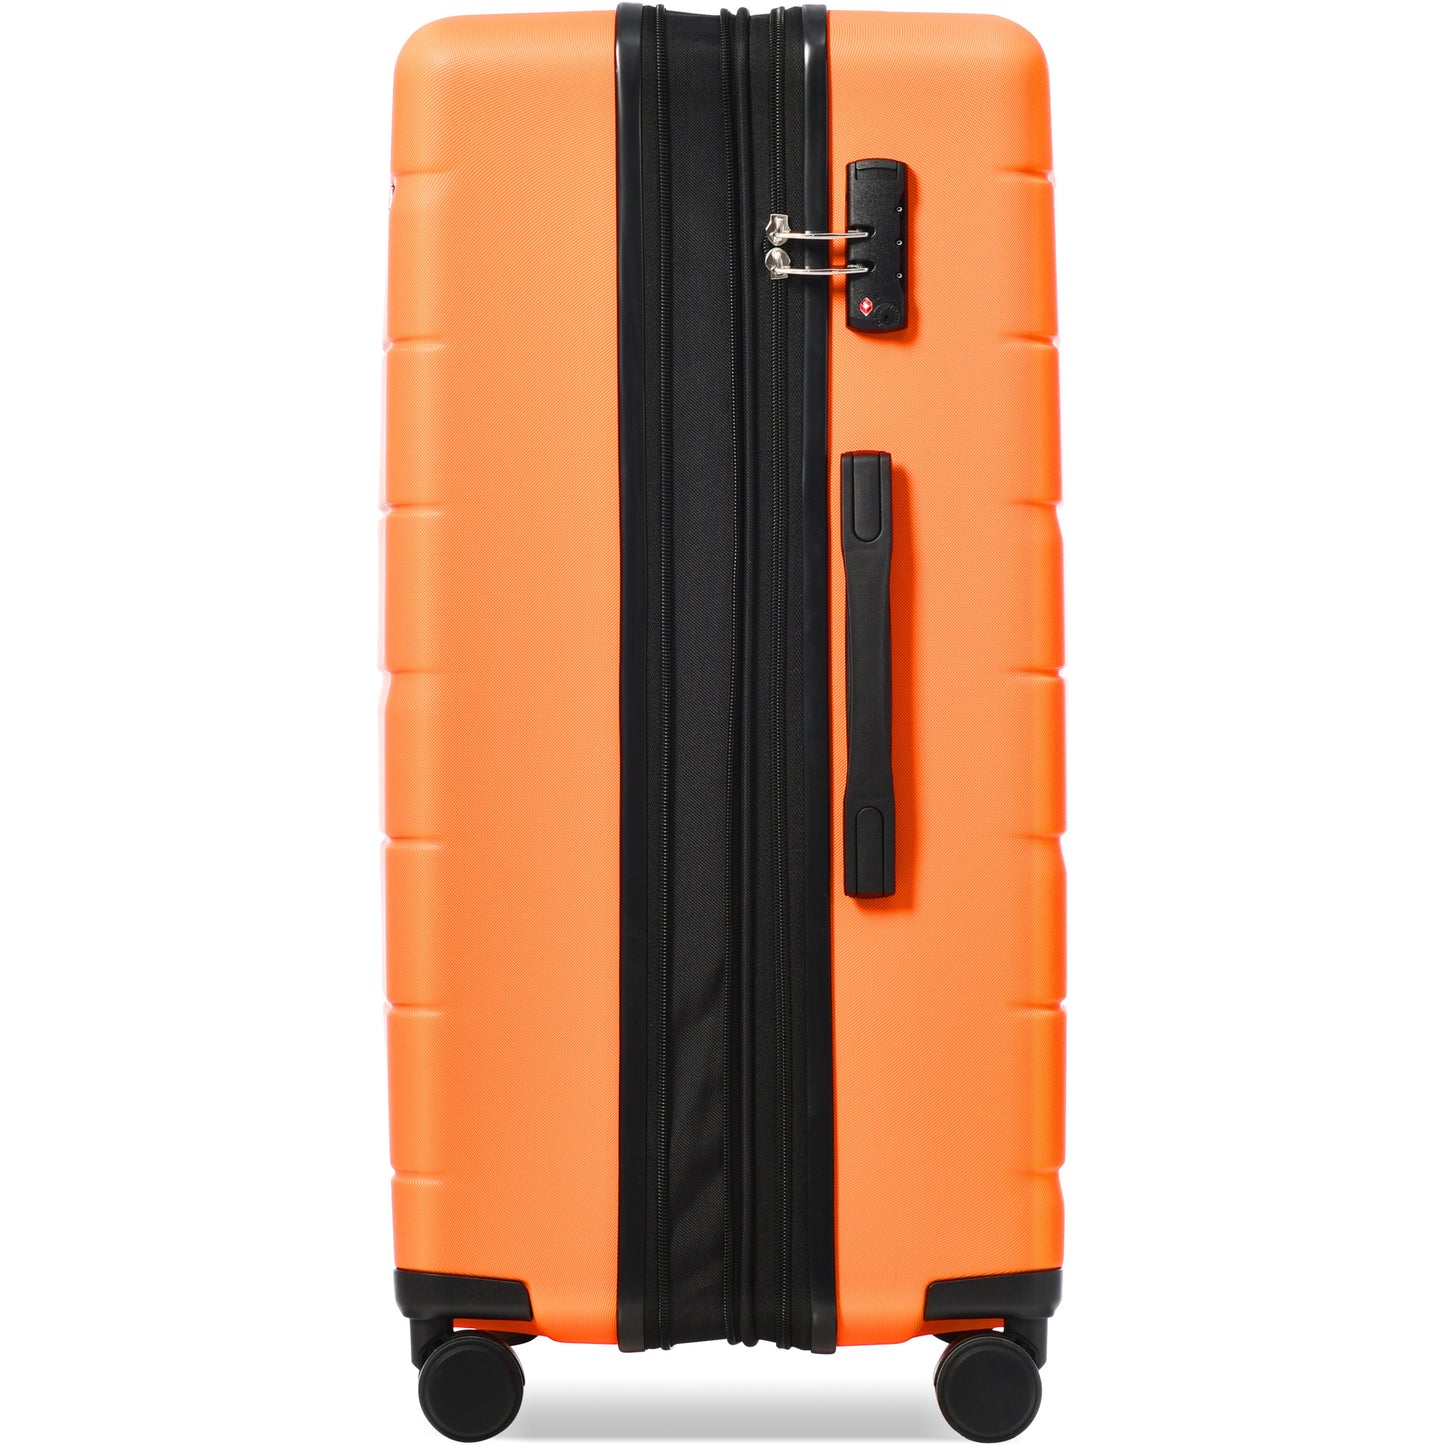 Orange Luggage Sets 3 Piece Suitcase Set 20/24/28,Carry on Luggage Airline Approved